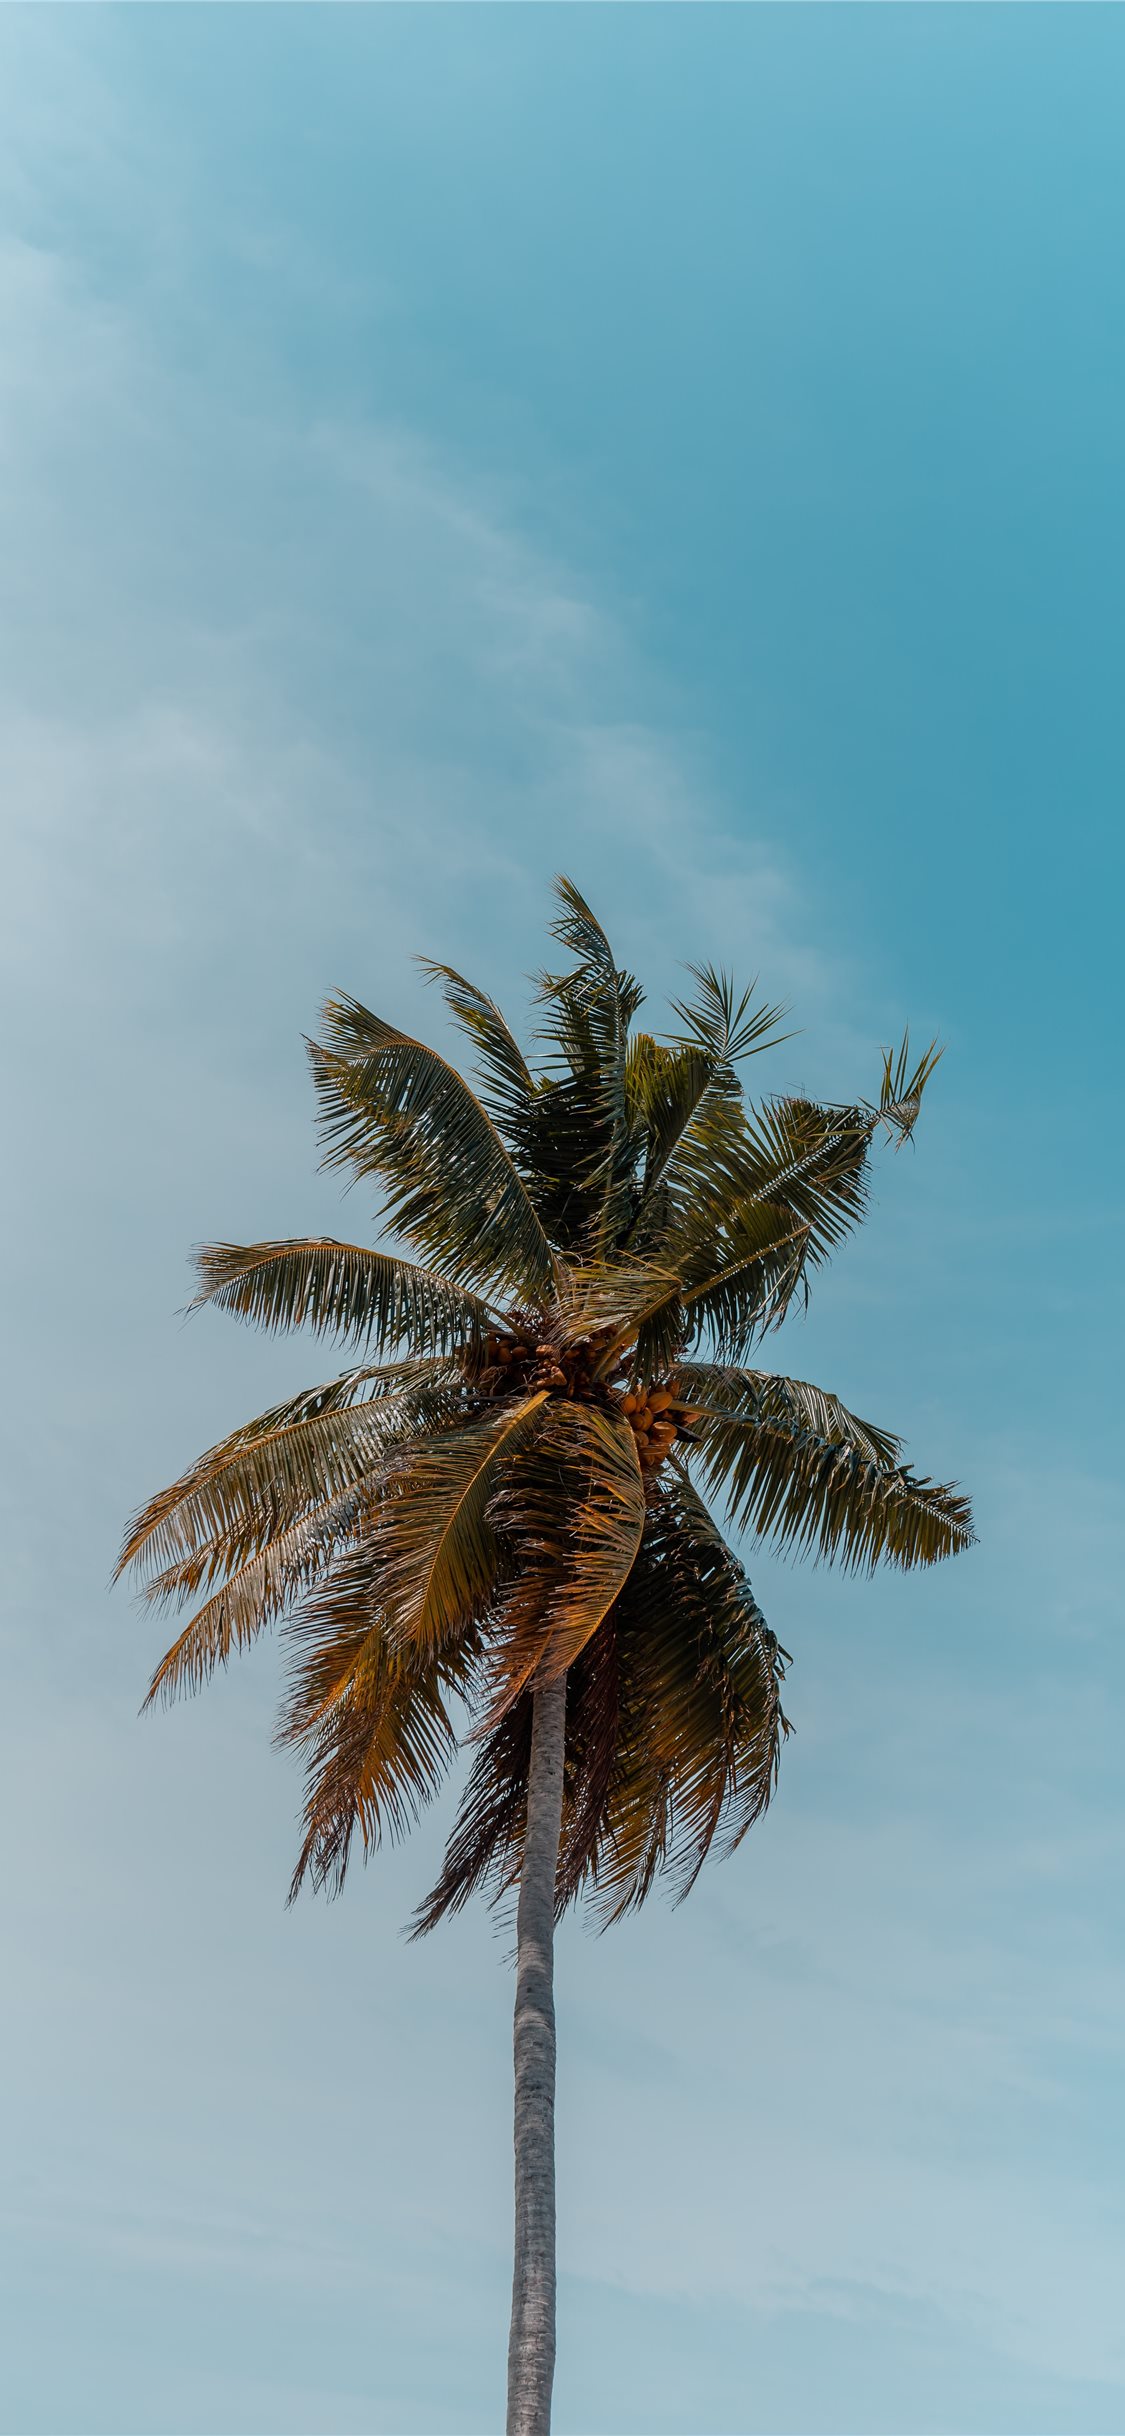 green coconut tree under blue sky iPhone X Wallpaper Free Download